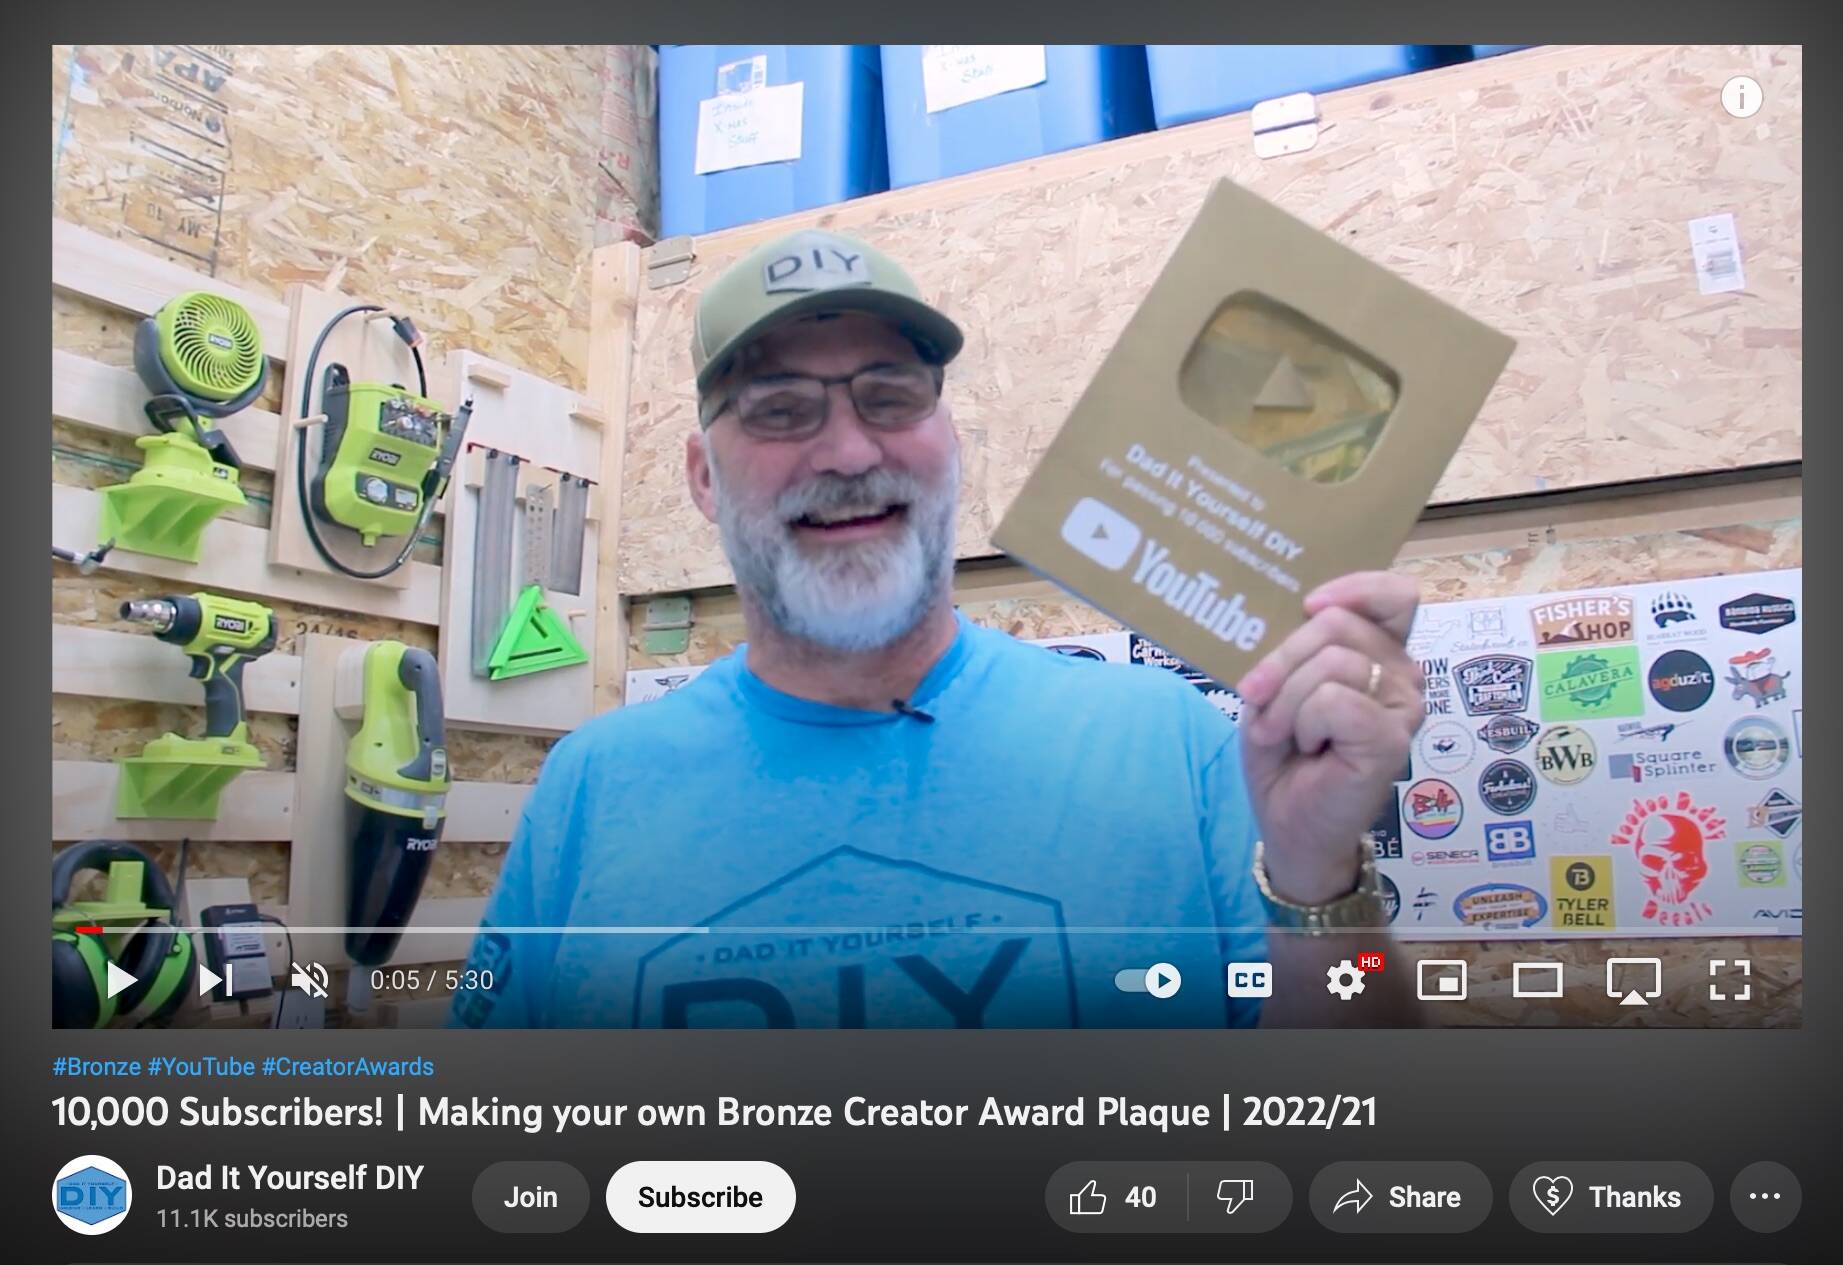 Scott Oram’s YouTube channel Dad it Yourself DIY now has 11,000 subscribers.